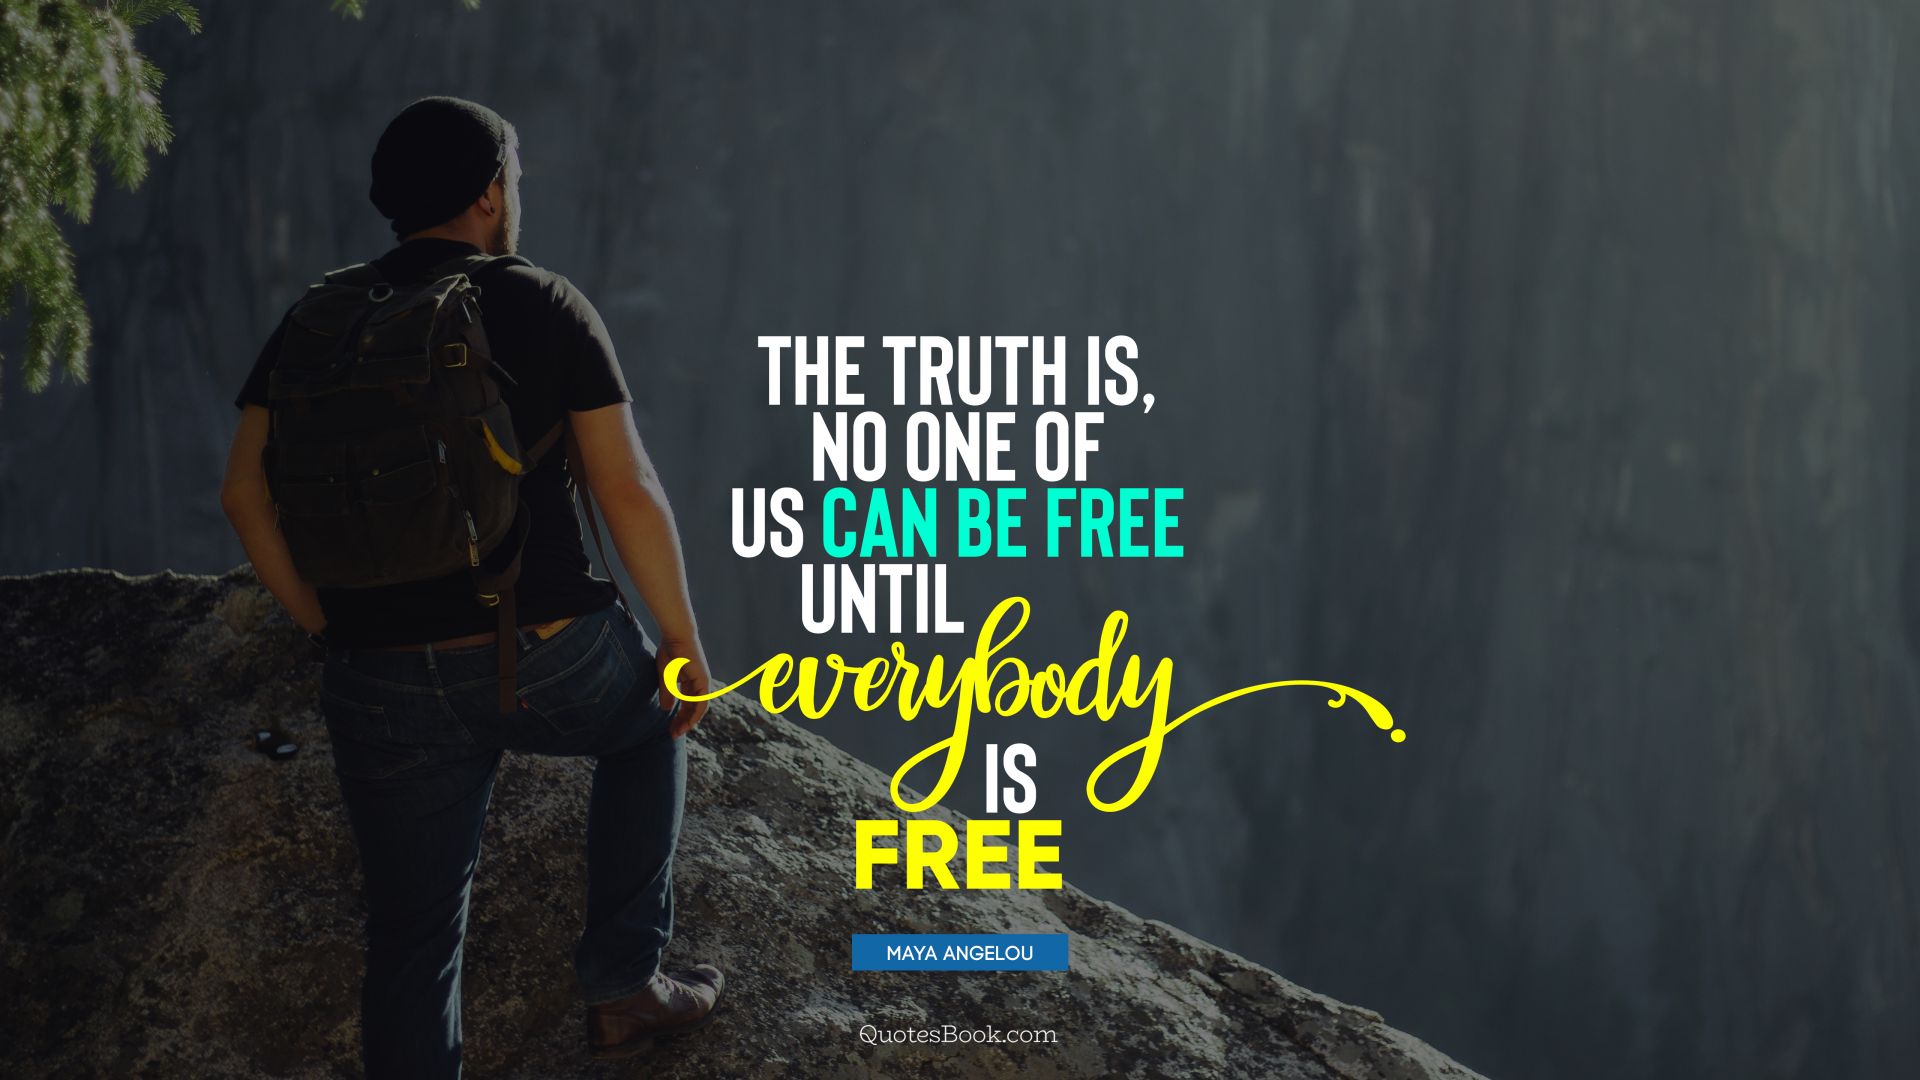 The truth is, no one of us can be free until everybody is free. - Quote by Maya Angelou